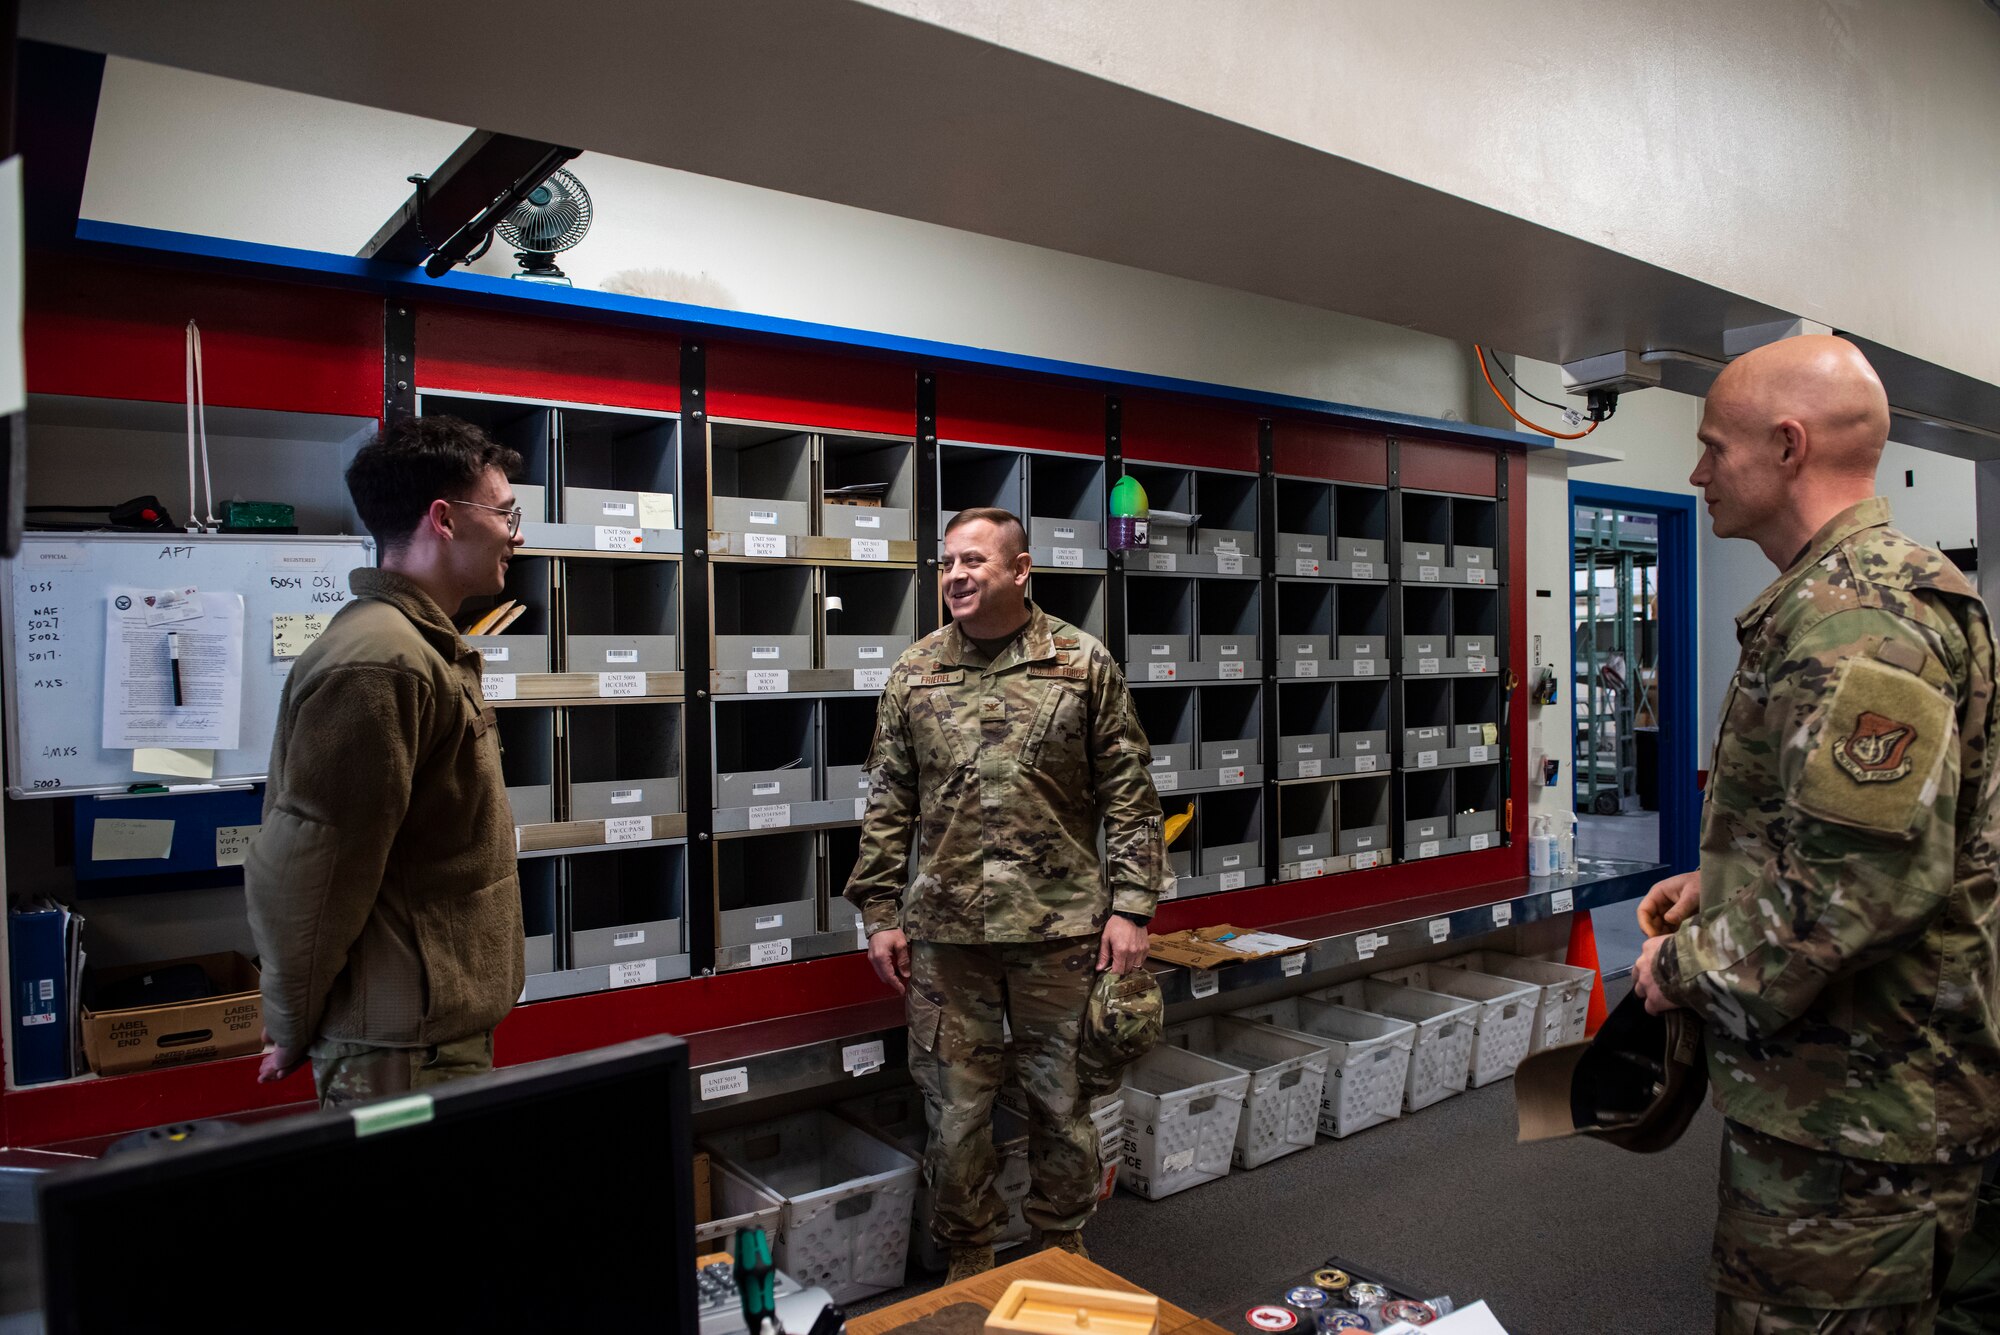 A group of military members in uniform talk next to shelves of mail.